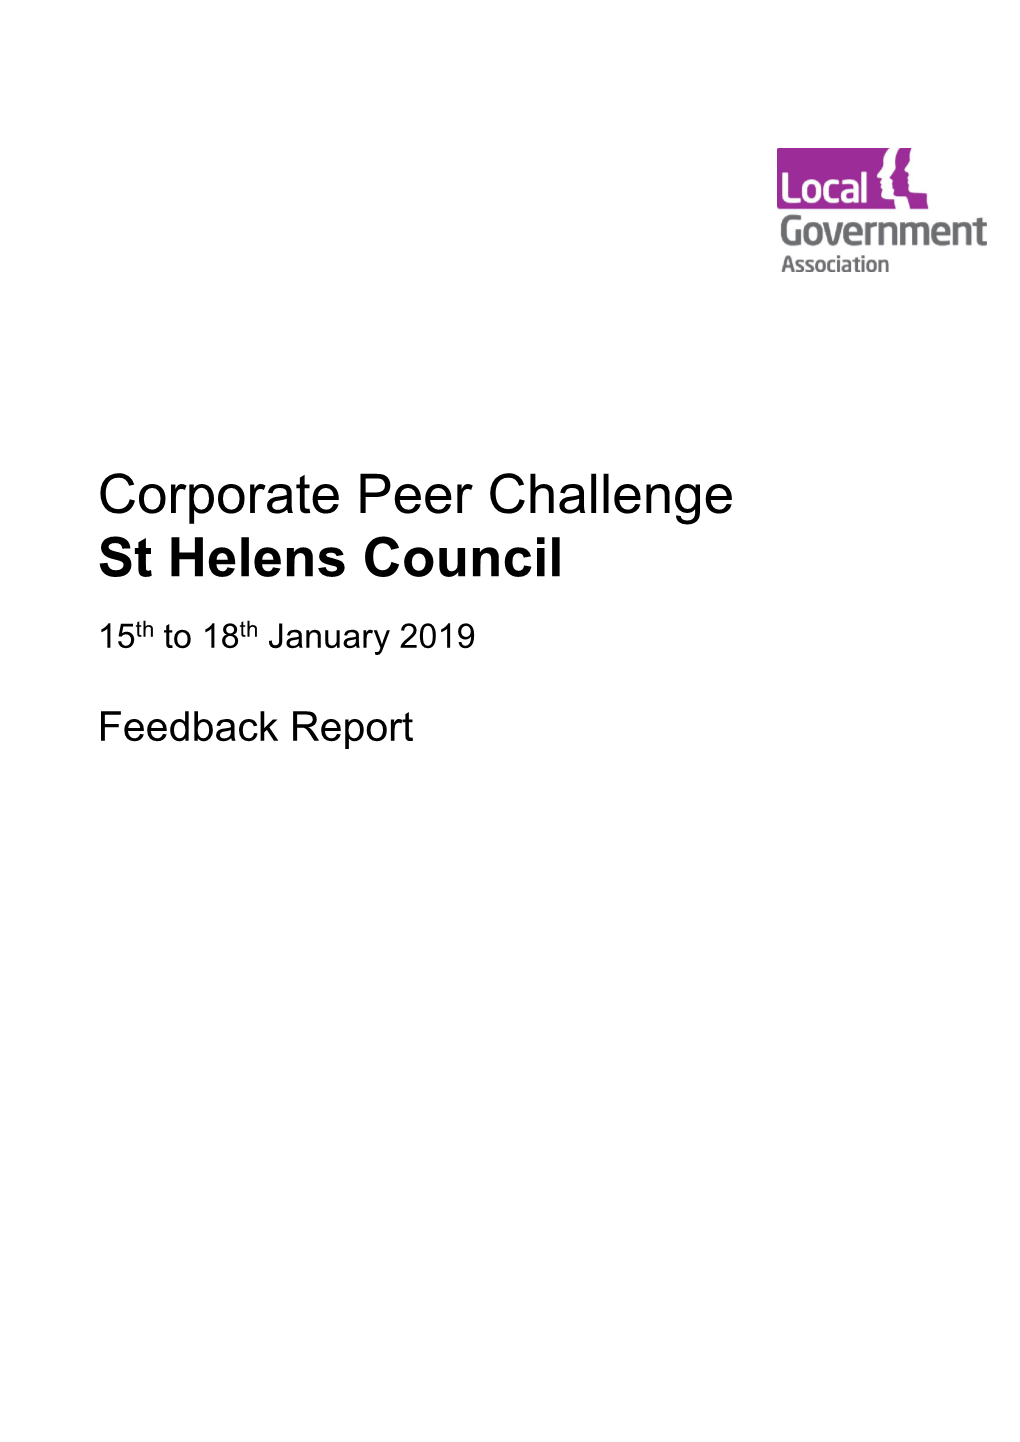 Corporate Peer Challenge St Helens Council